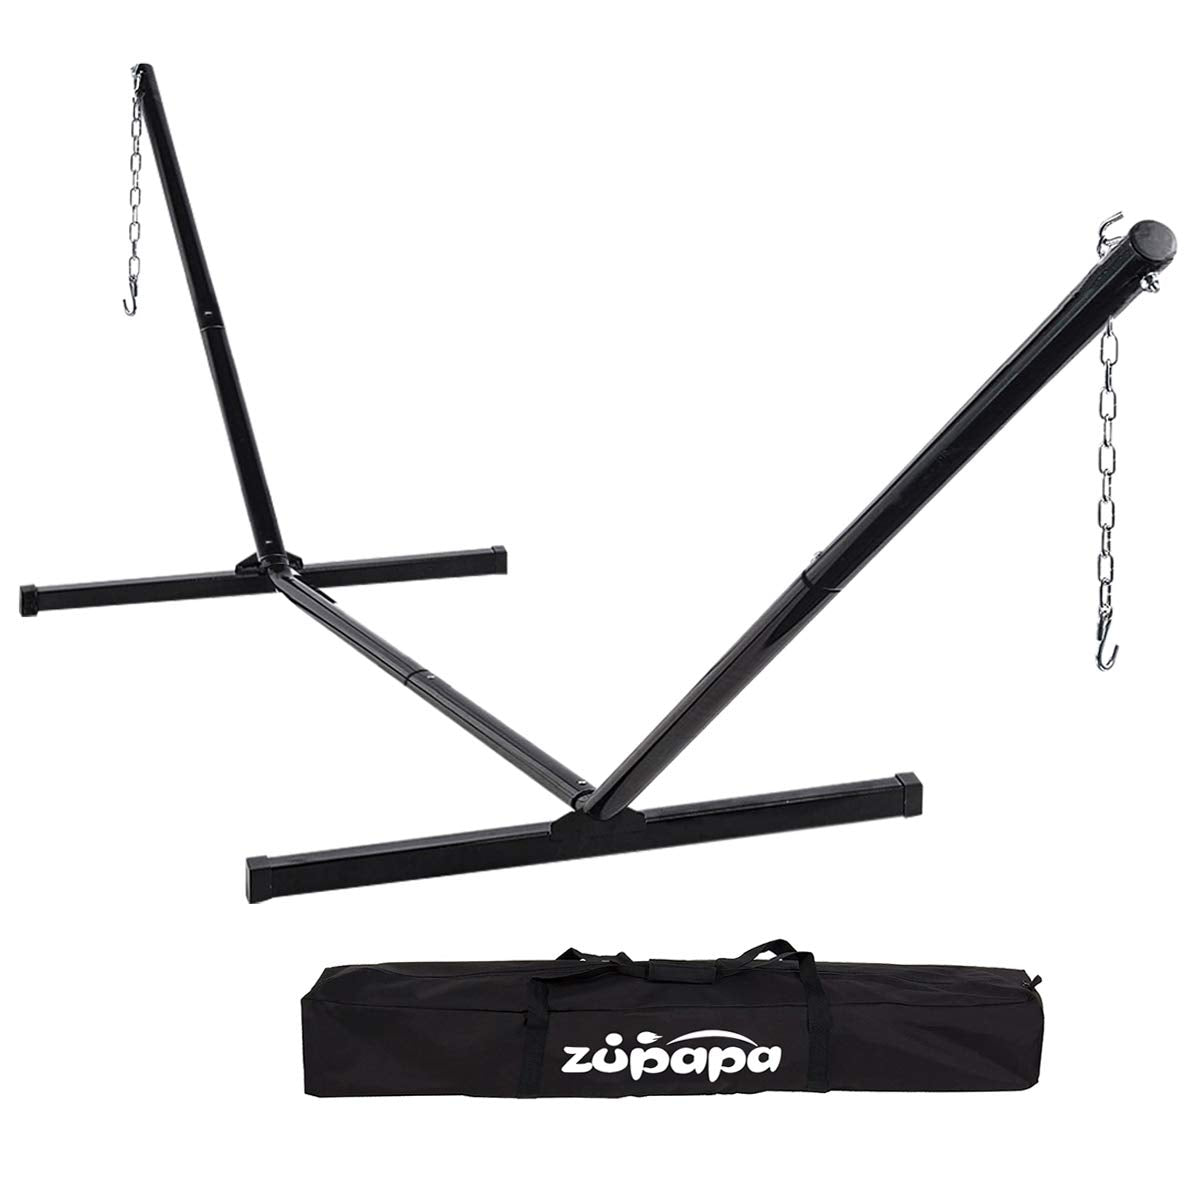 Zupapa Hammock Stand with 2 Steel Chains & 1 Carry Bag